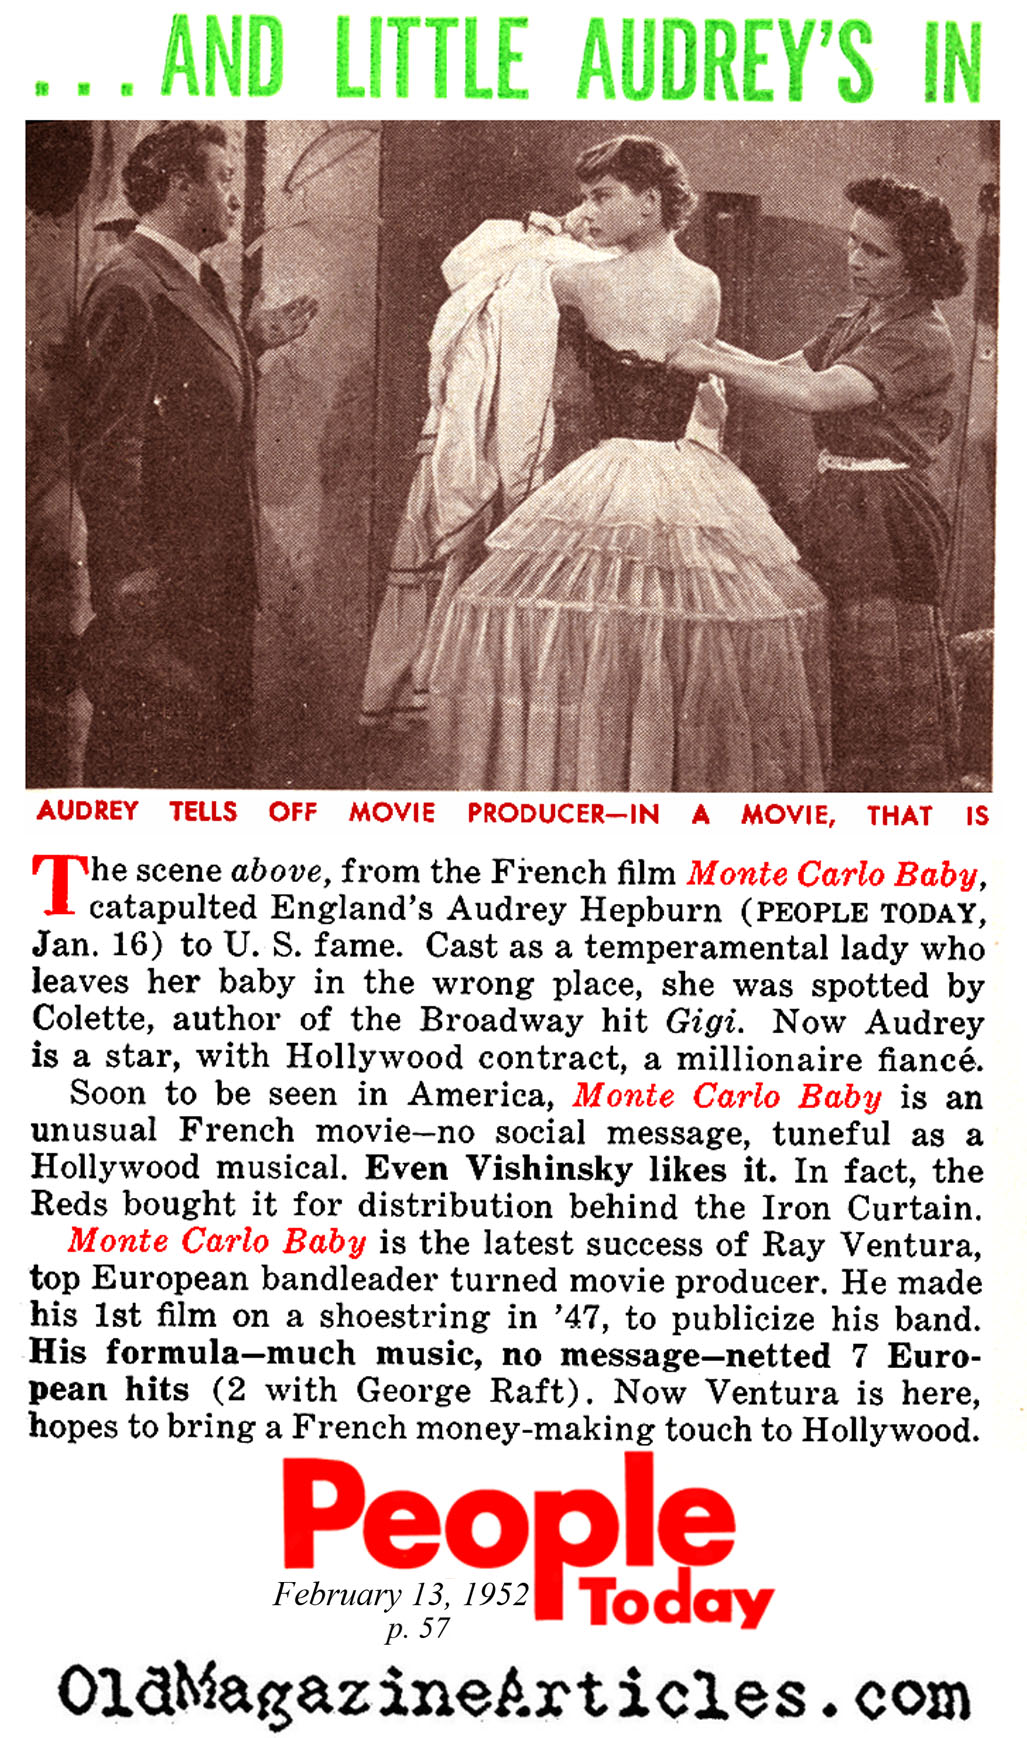 The Discovery of Audrey Hepburn (People Today, 1952)